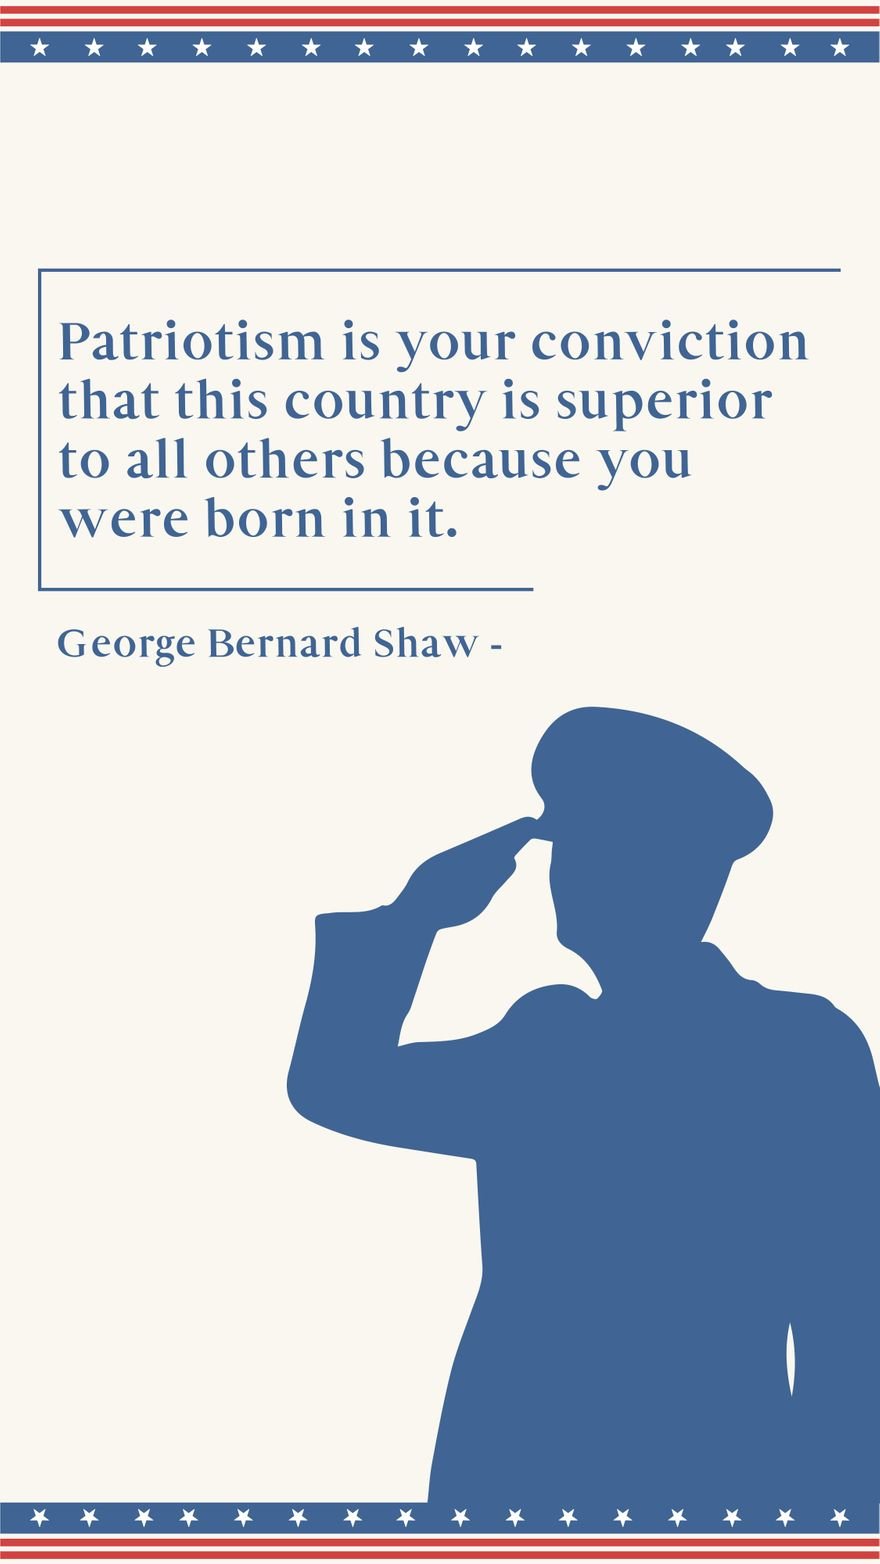 Free George Bernard Shaw - Patriotism is your conviction that this country is superior to all others because you were born in it. in JPG